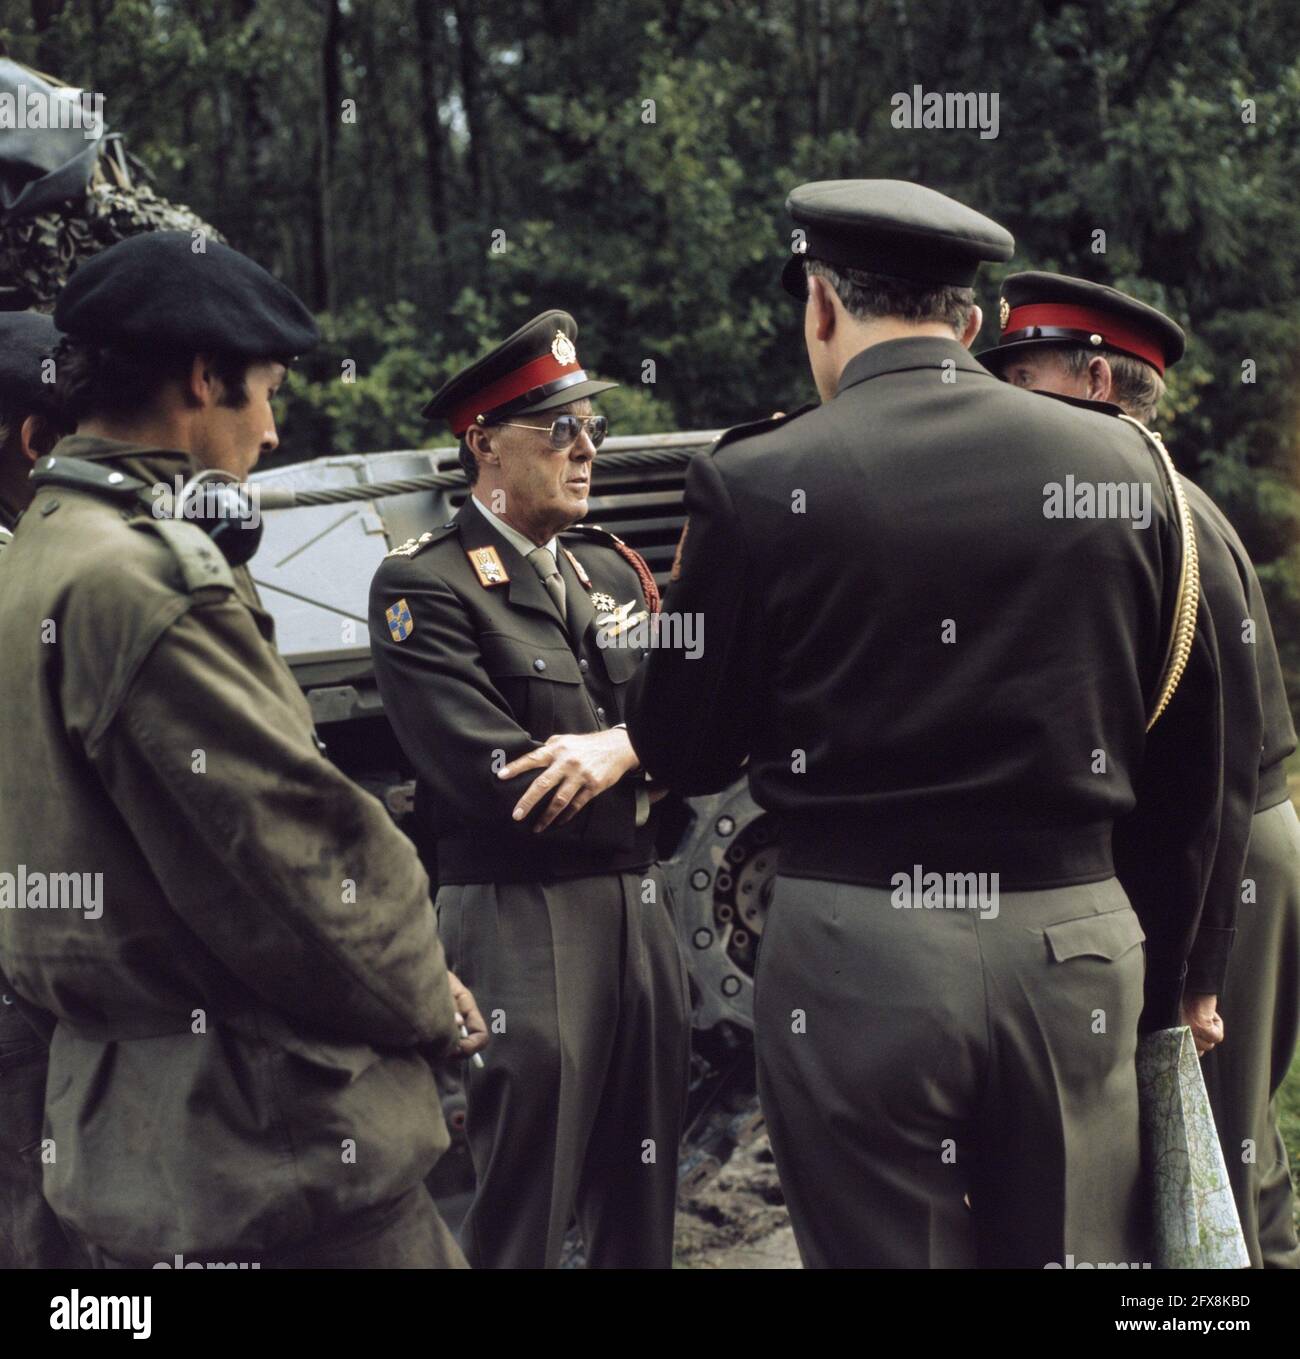 Bernhard visits Dutch military participating in NATO army exercise Big  Ferro in West Germany, Bernhard (in military uniform) among military  personnel, September 19, 1973, MILITARY, uniforms, The Netherlands, 20th  century press agency